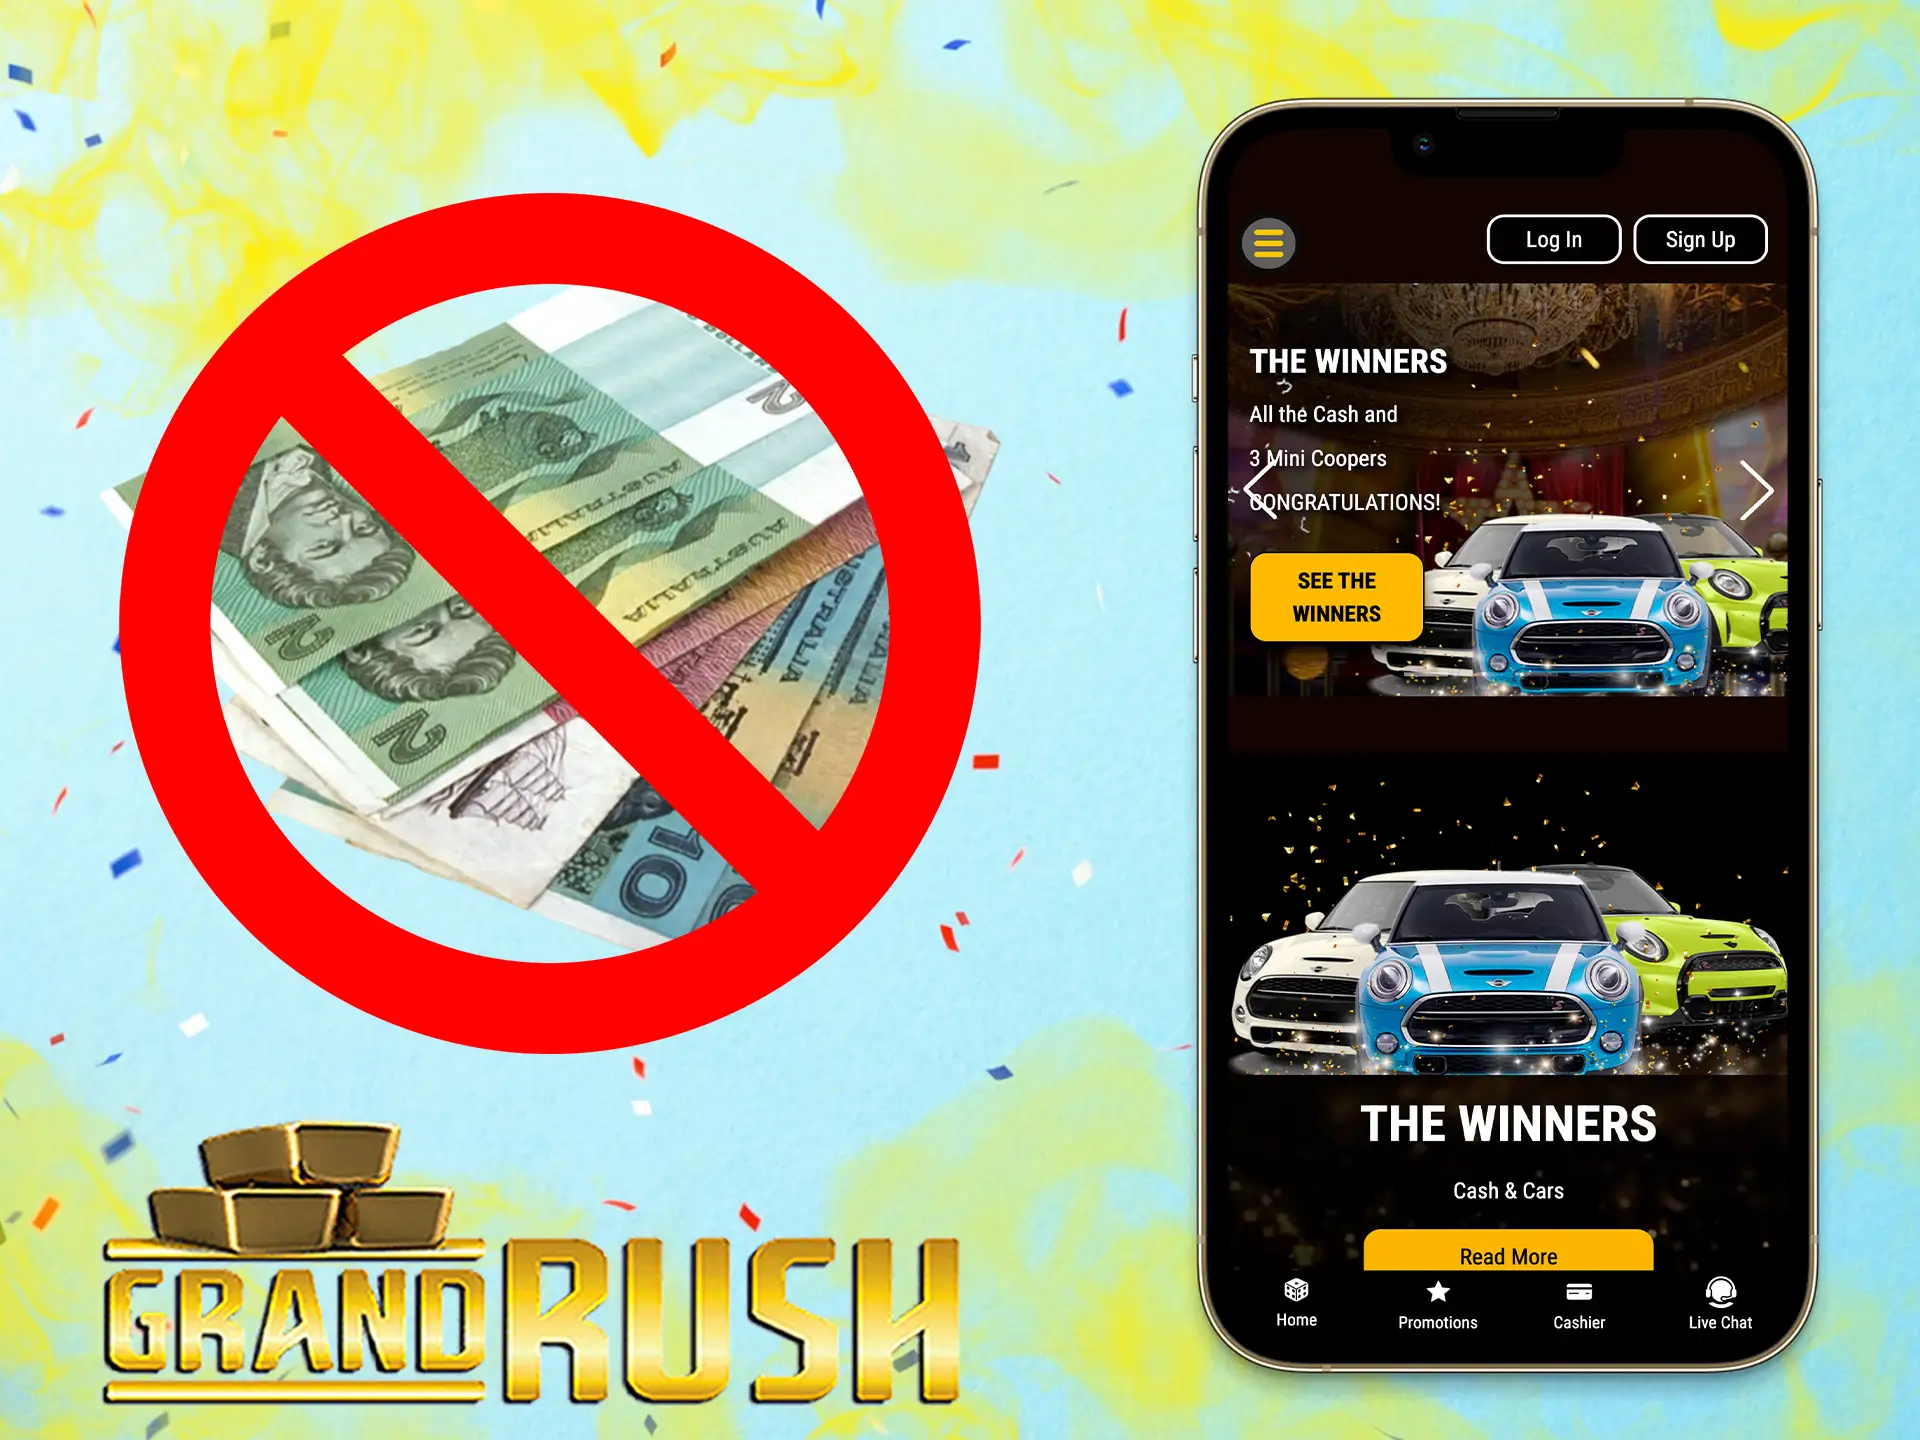 Create an account and get a Grand Rush no-deposit bonus of 40 free spins.